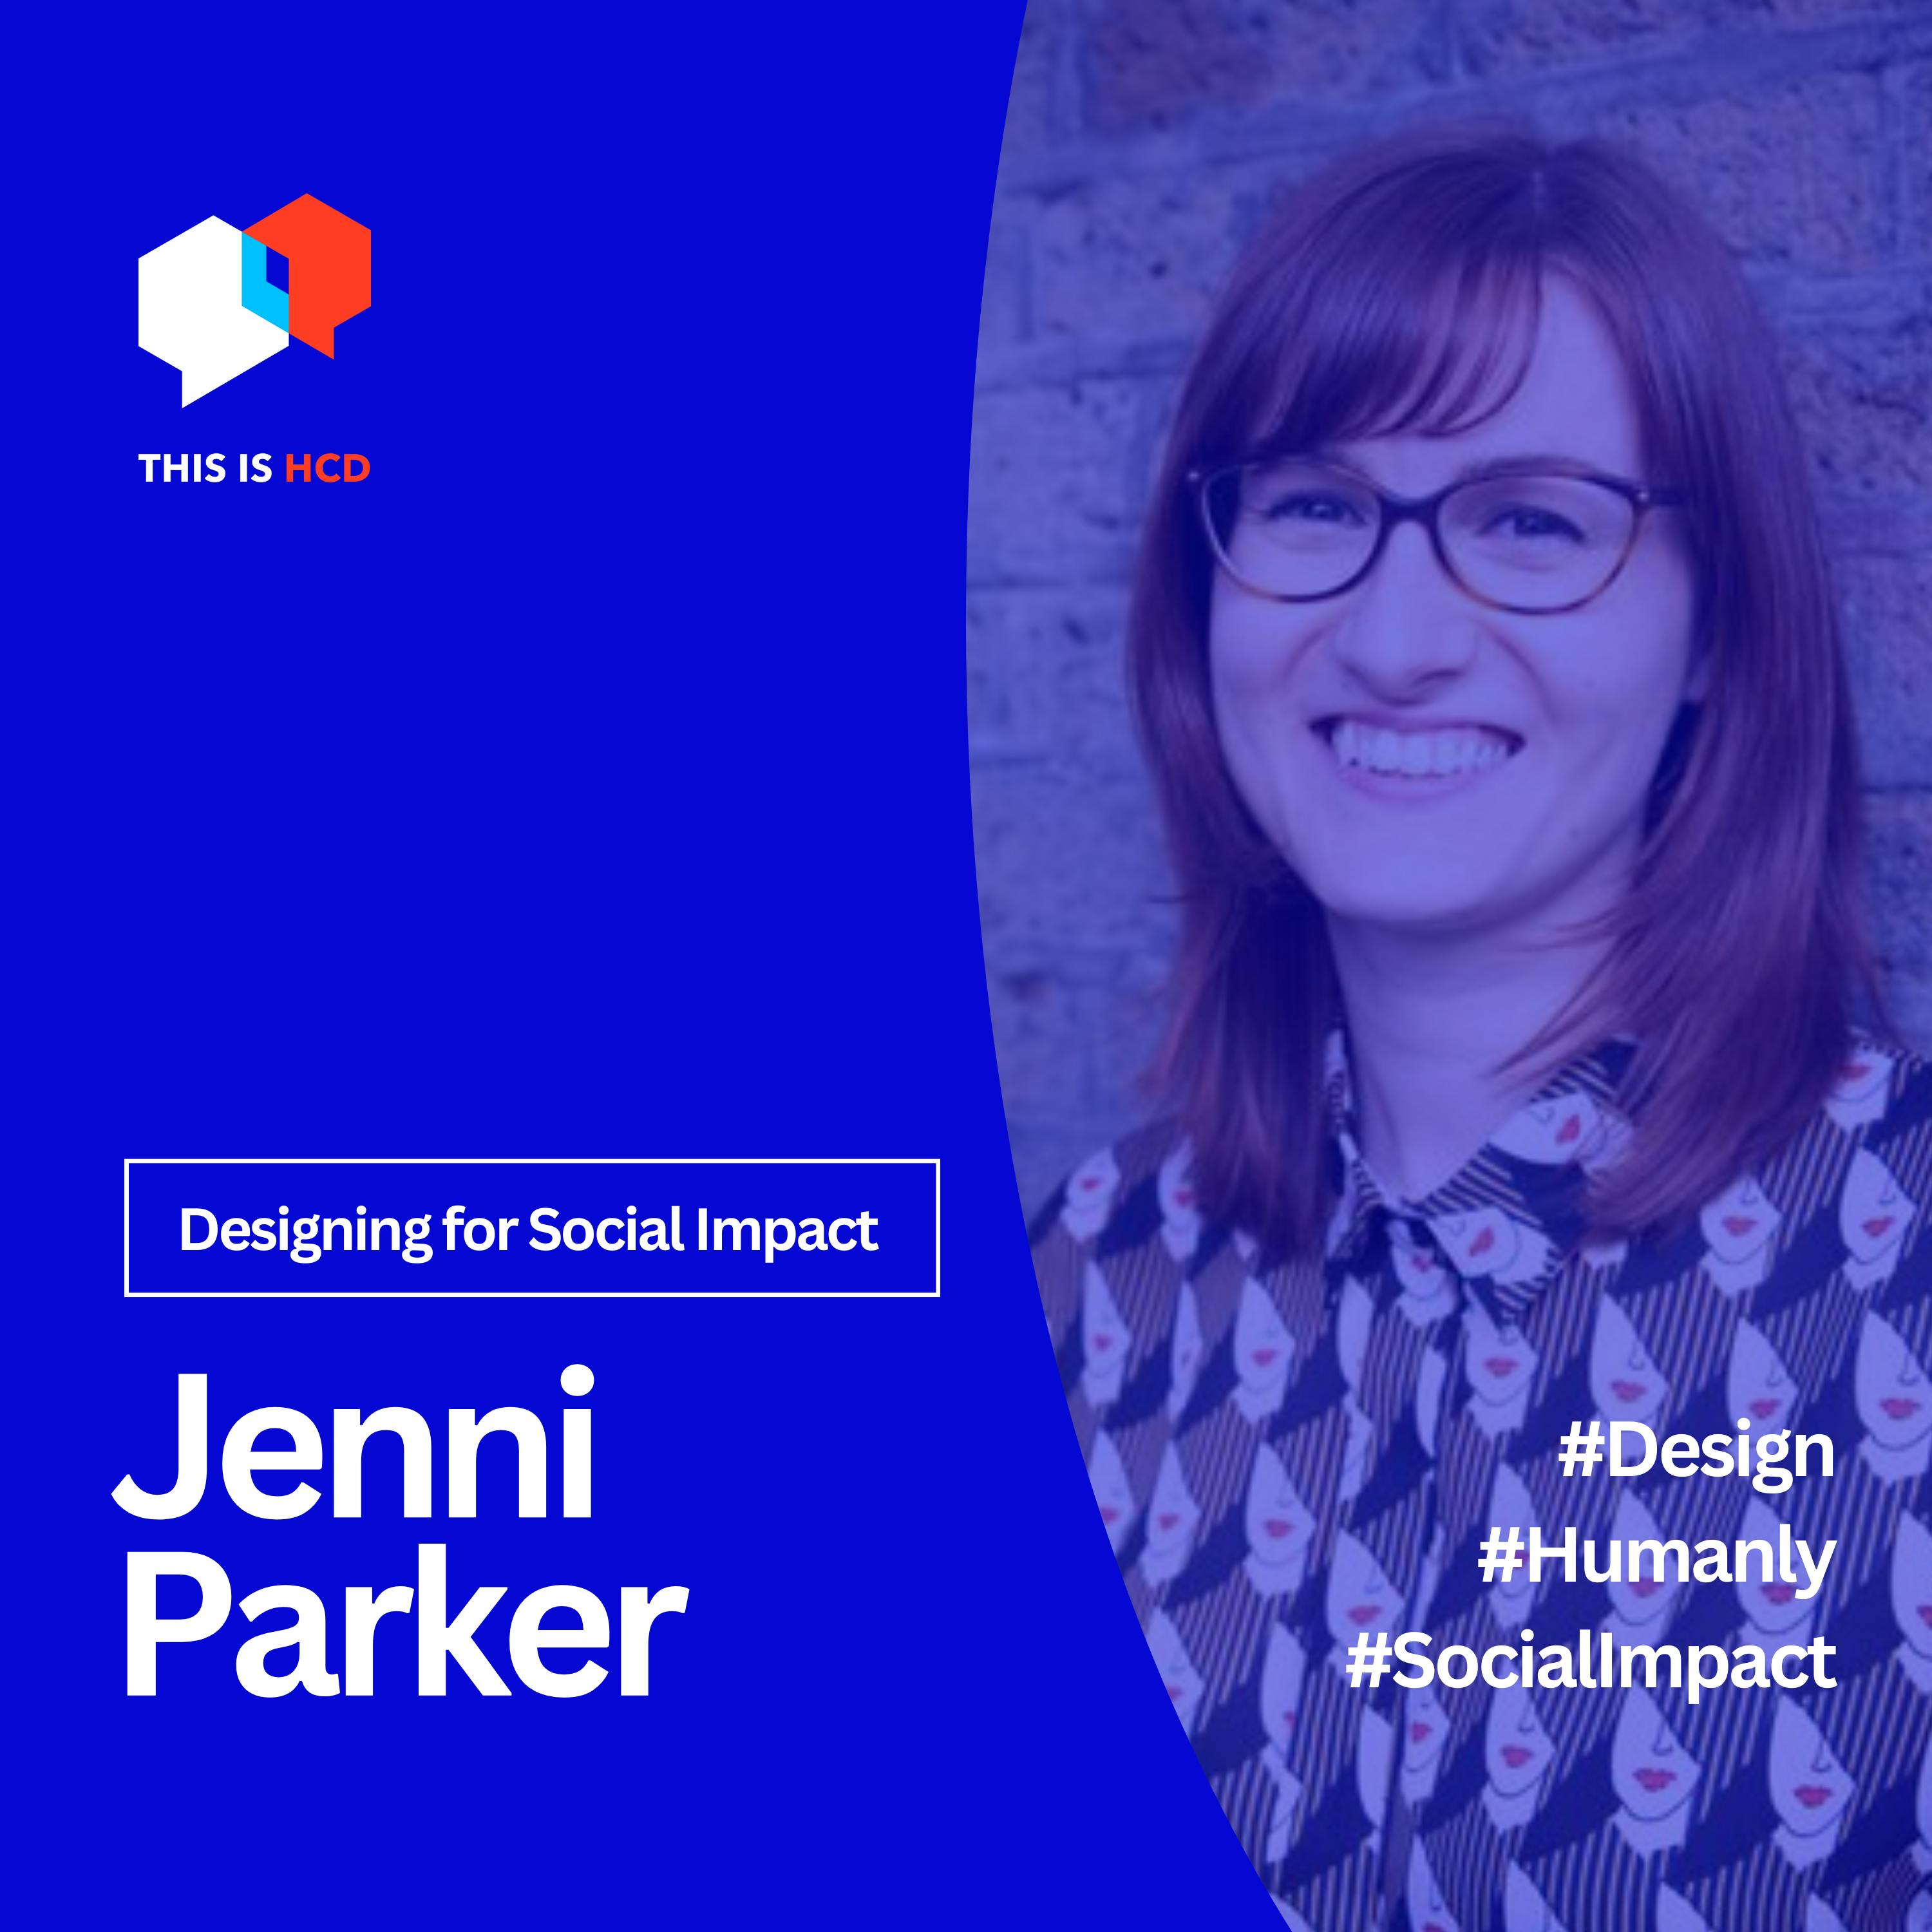 "Designing for Social Impact: A Conversation with Jenni Parker"